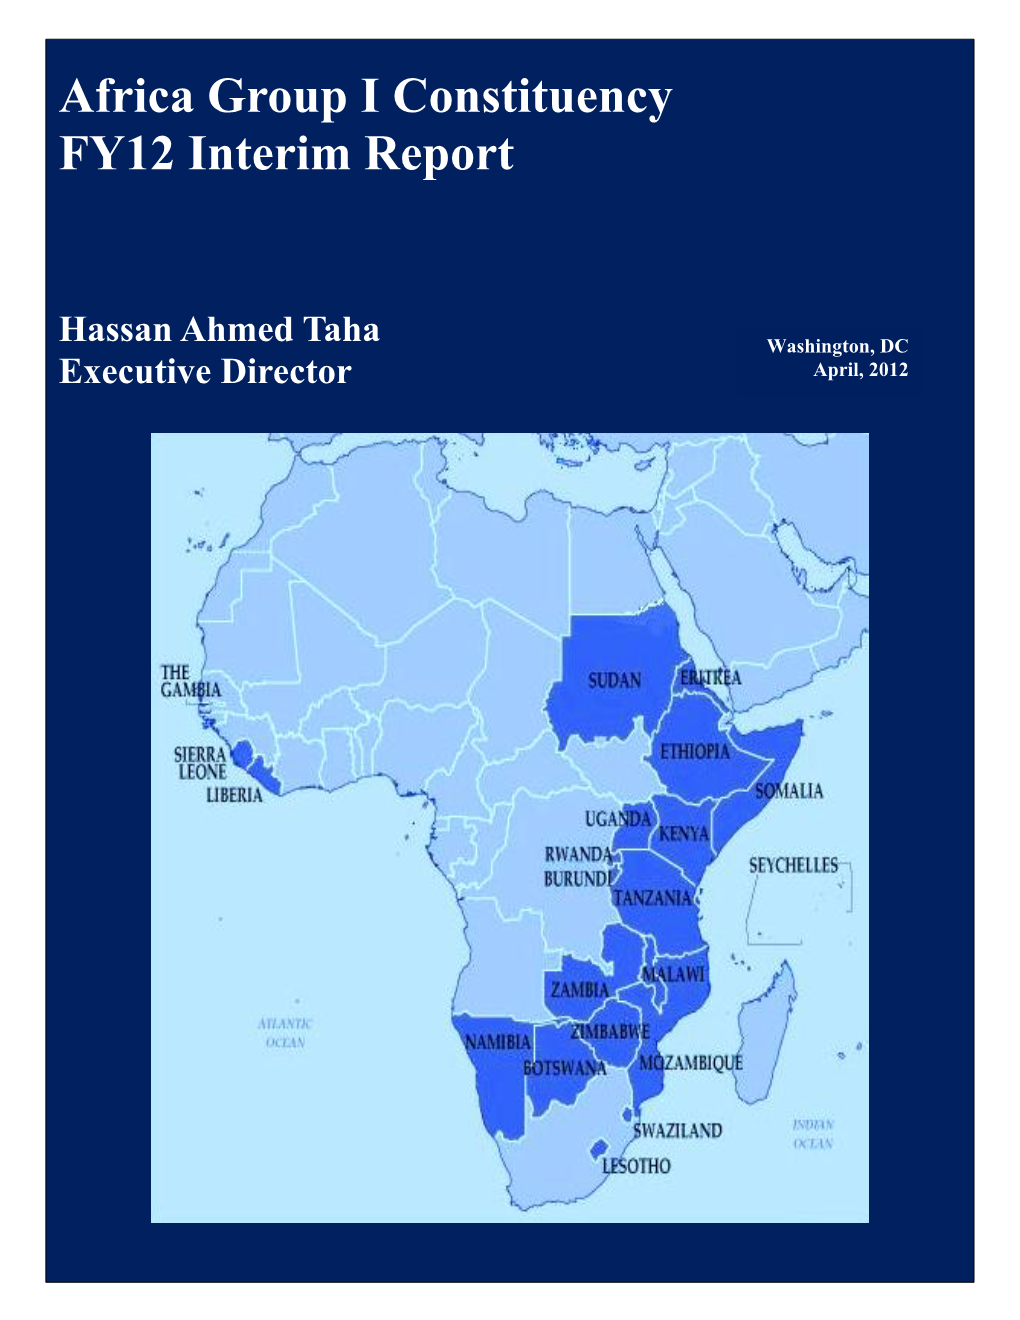 Africa Group I Constituency FY12 Interim Report